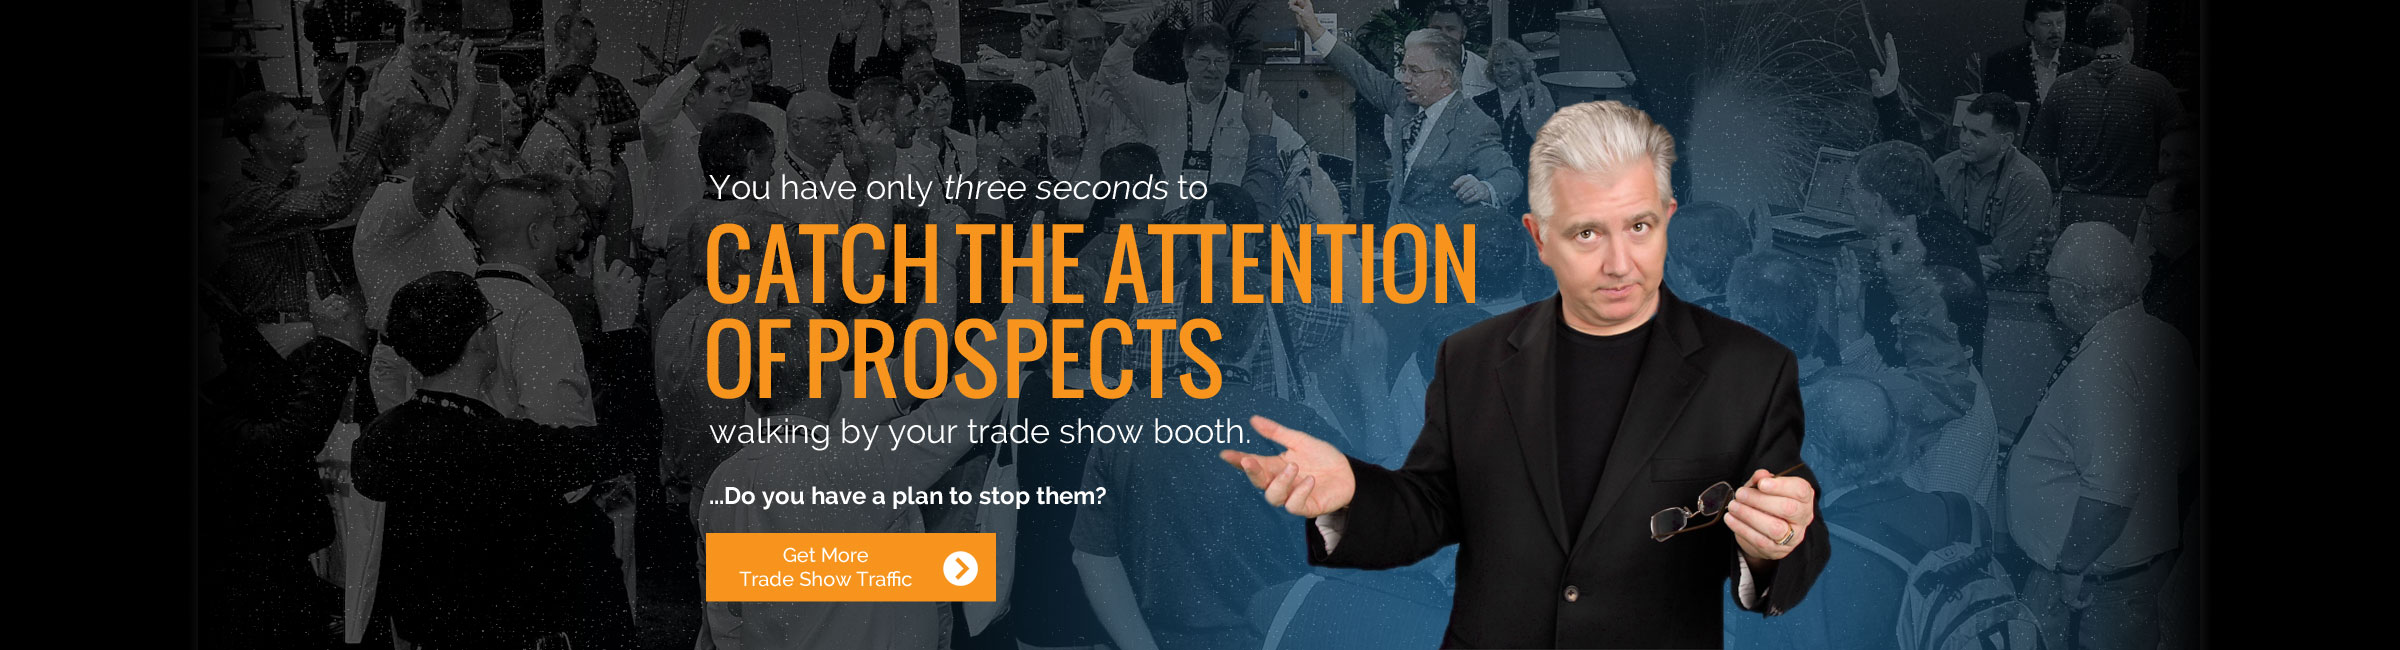 You only have three seconds to catch the attention of prospects walking by your trade show booth.